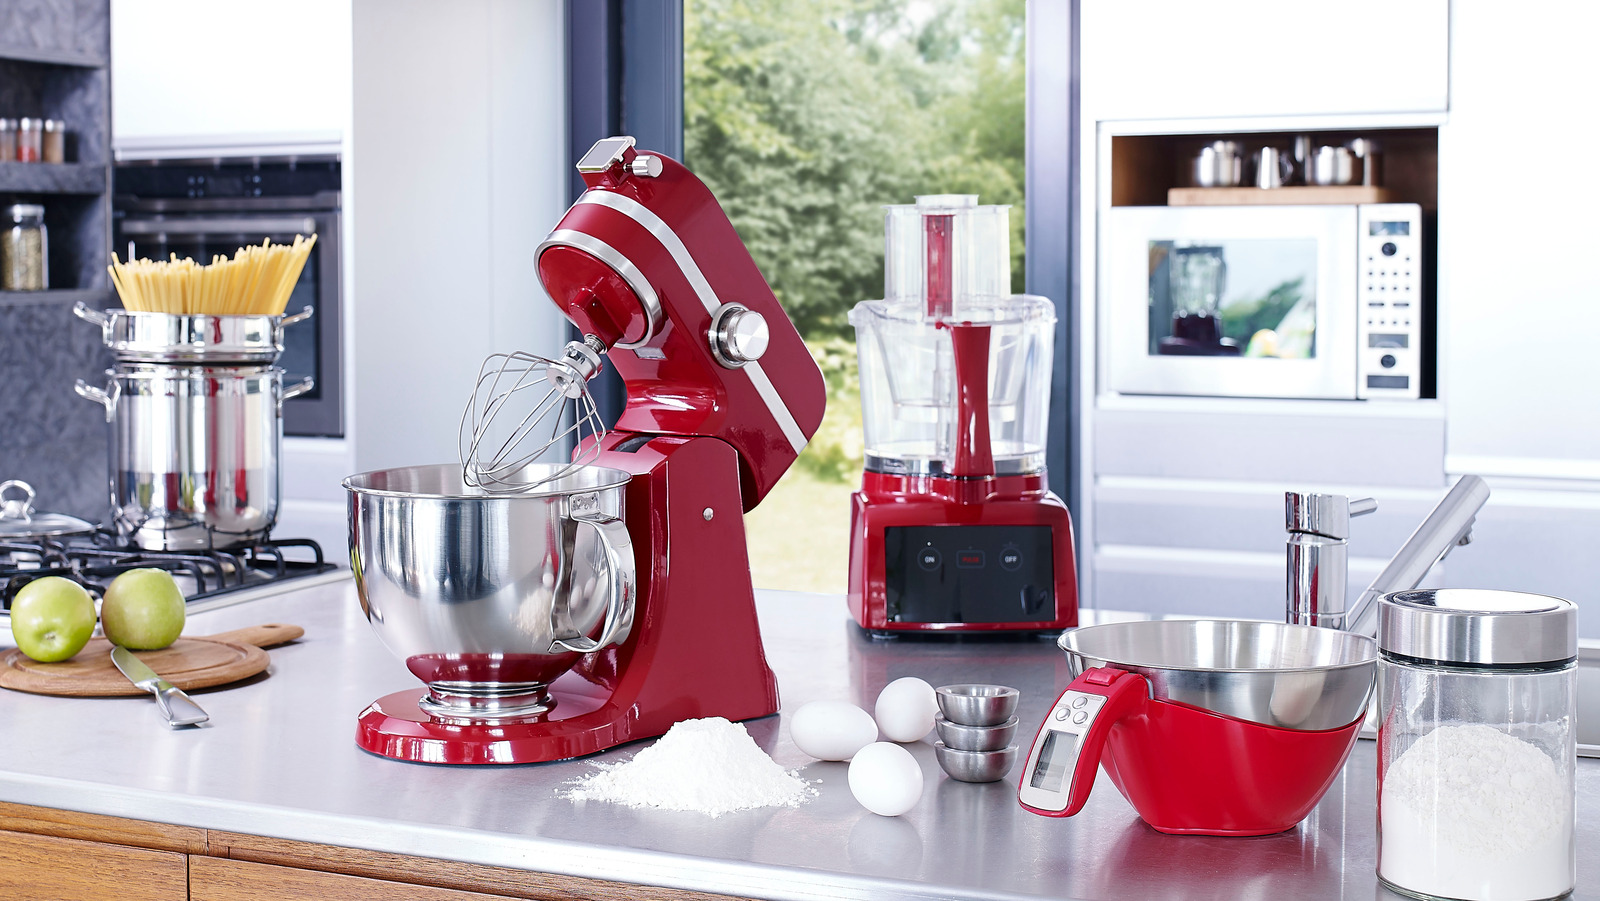 The Best Way To Clean All The Nooks And Crannies Of Your Small Kitchen Appliances